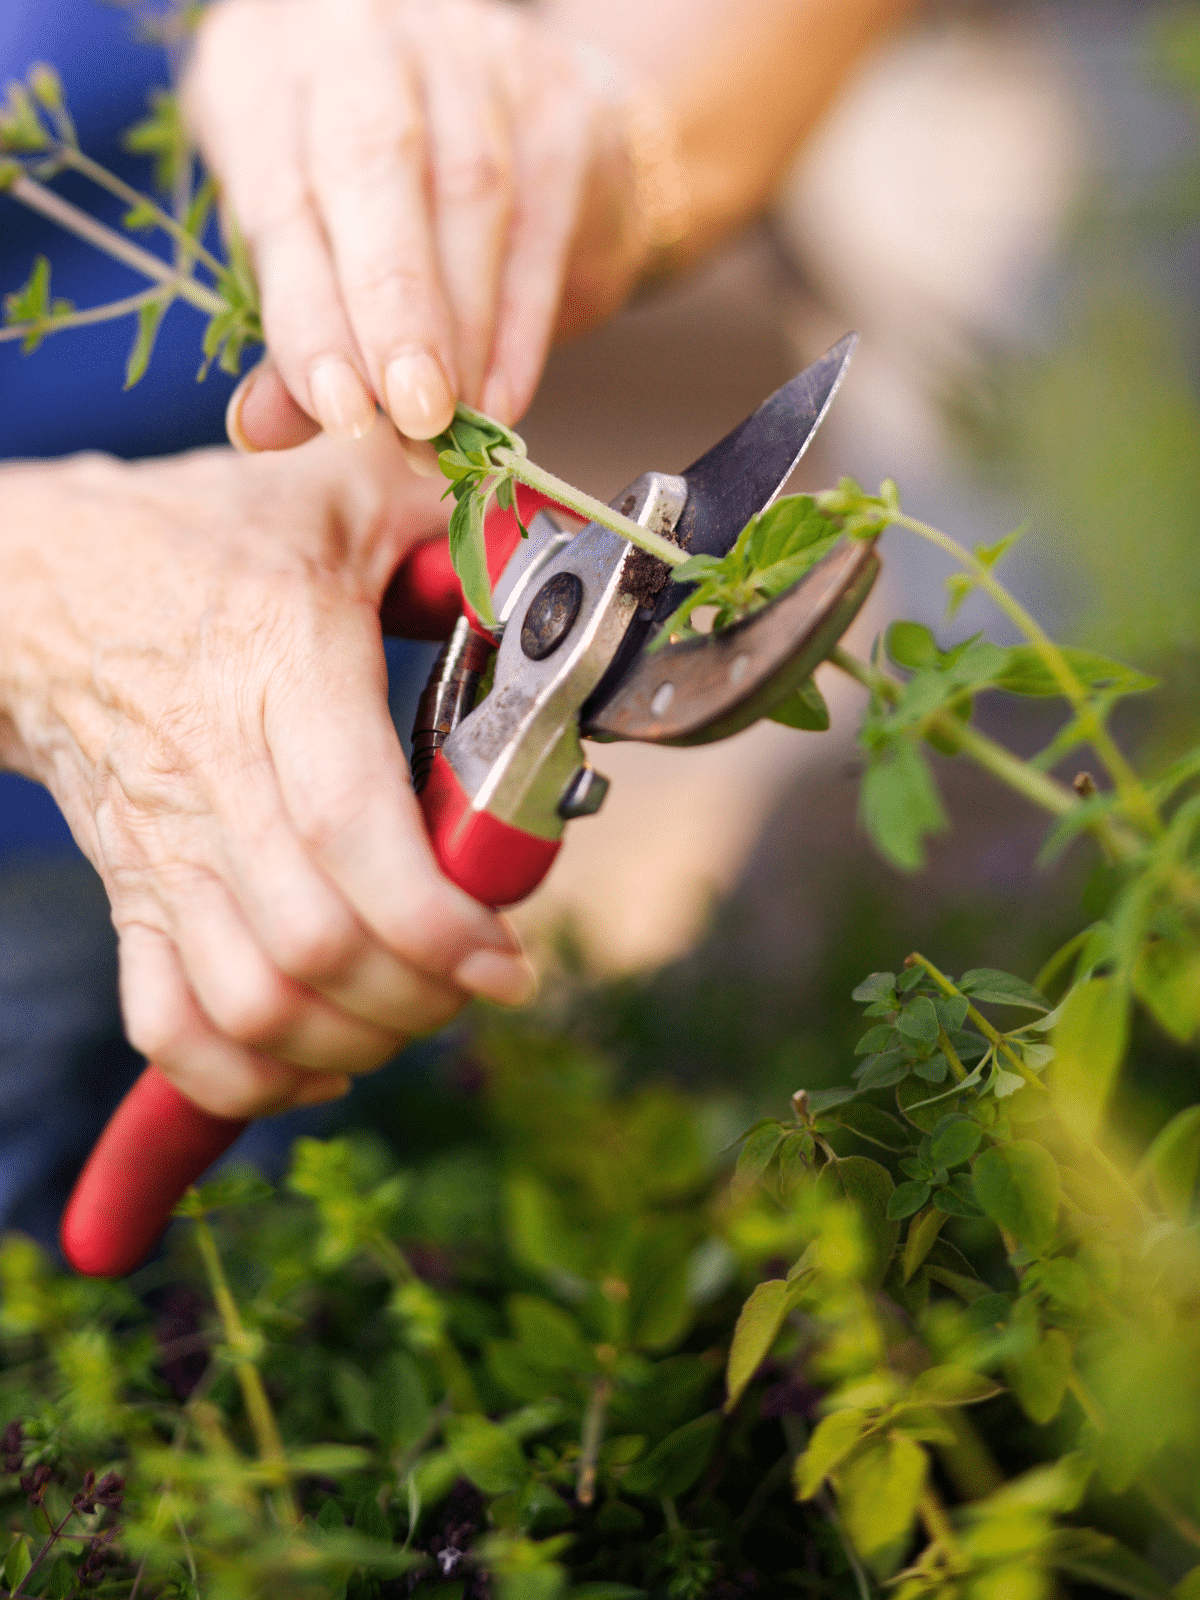 hands using pruners to trim a plant.